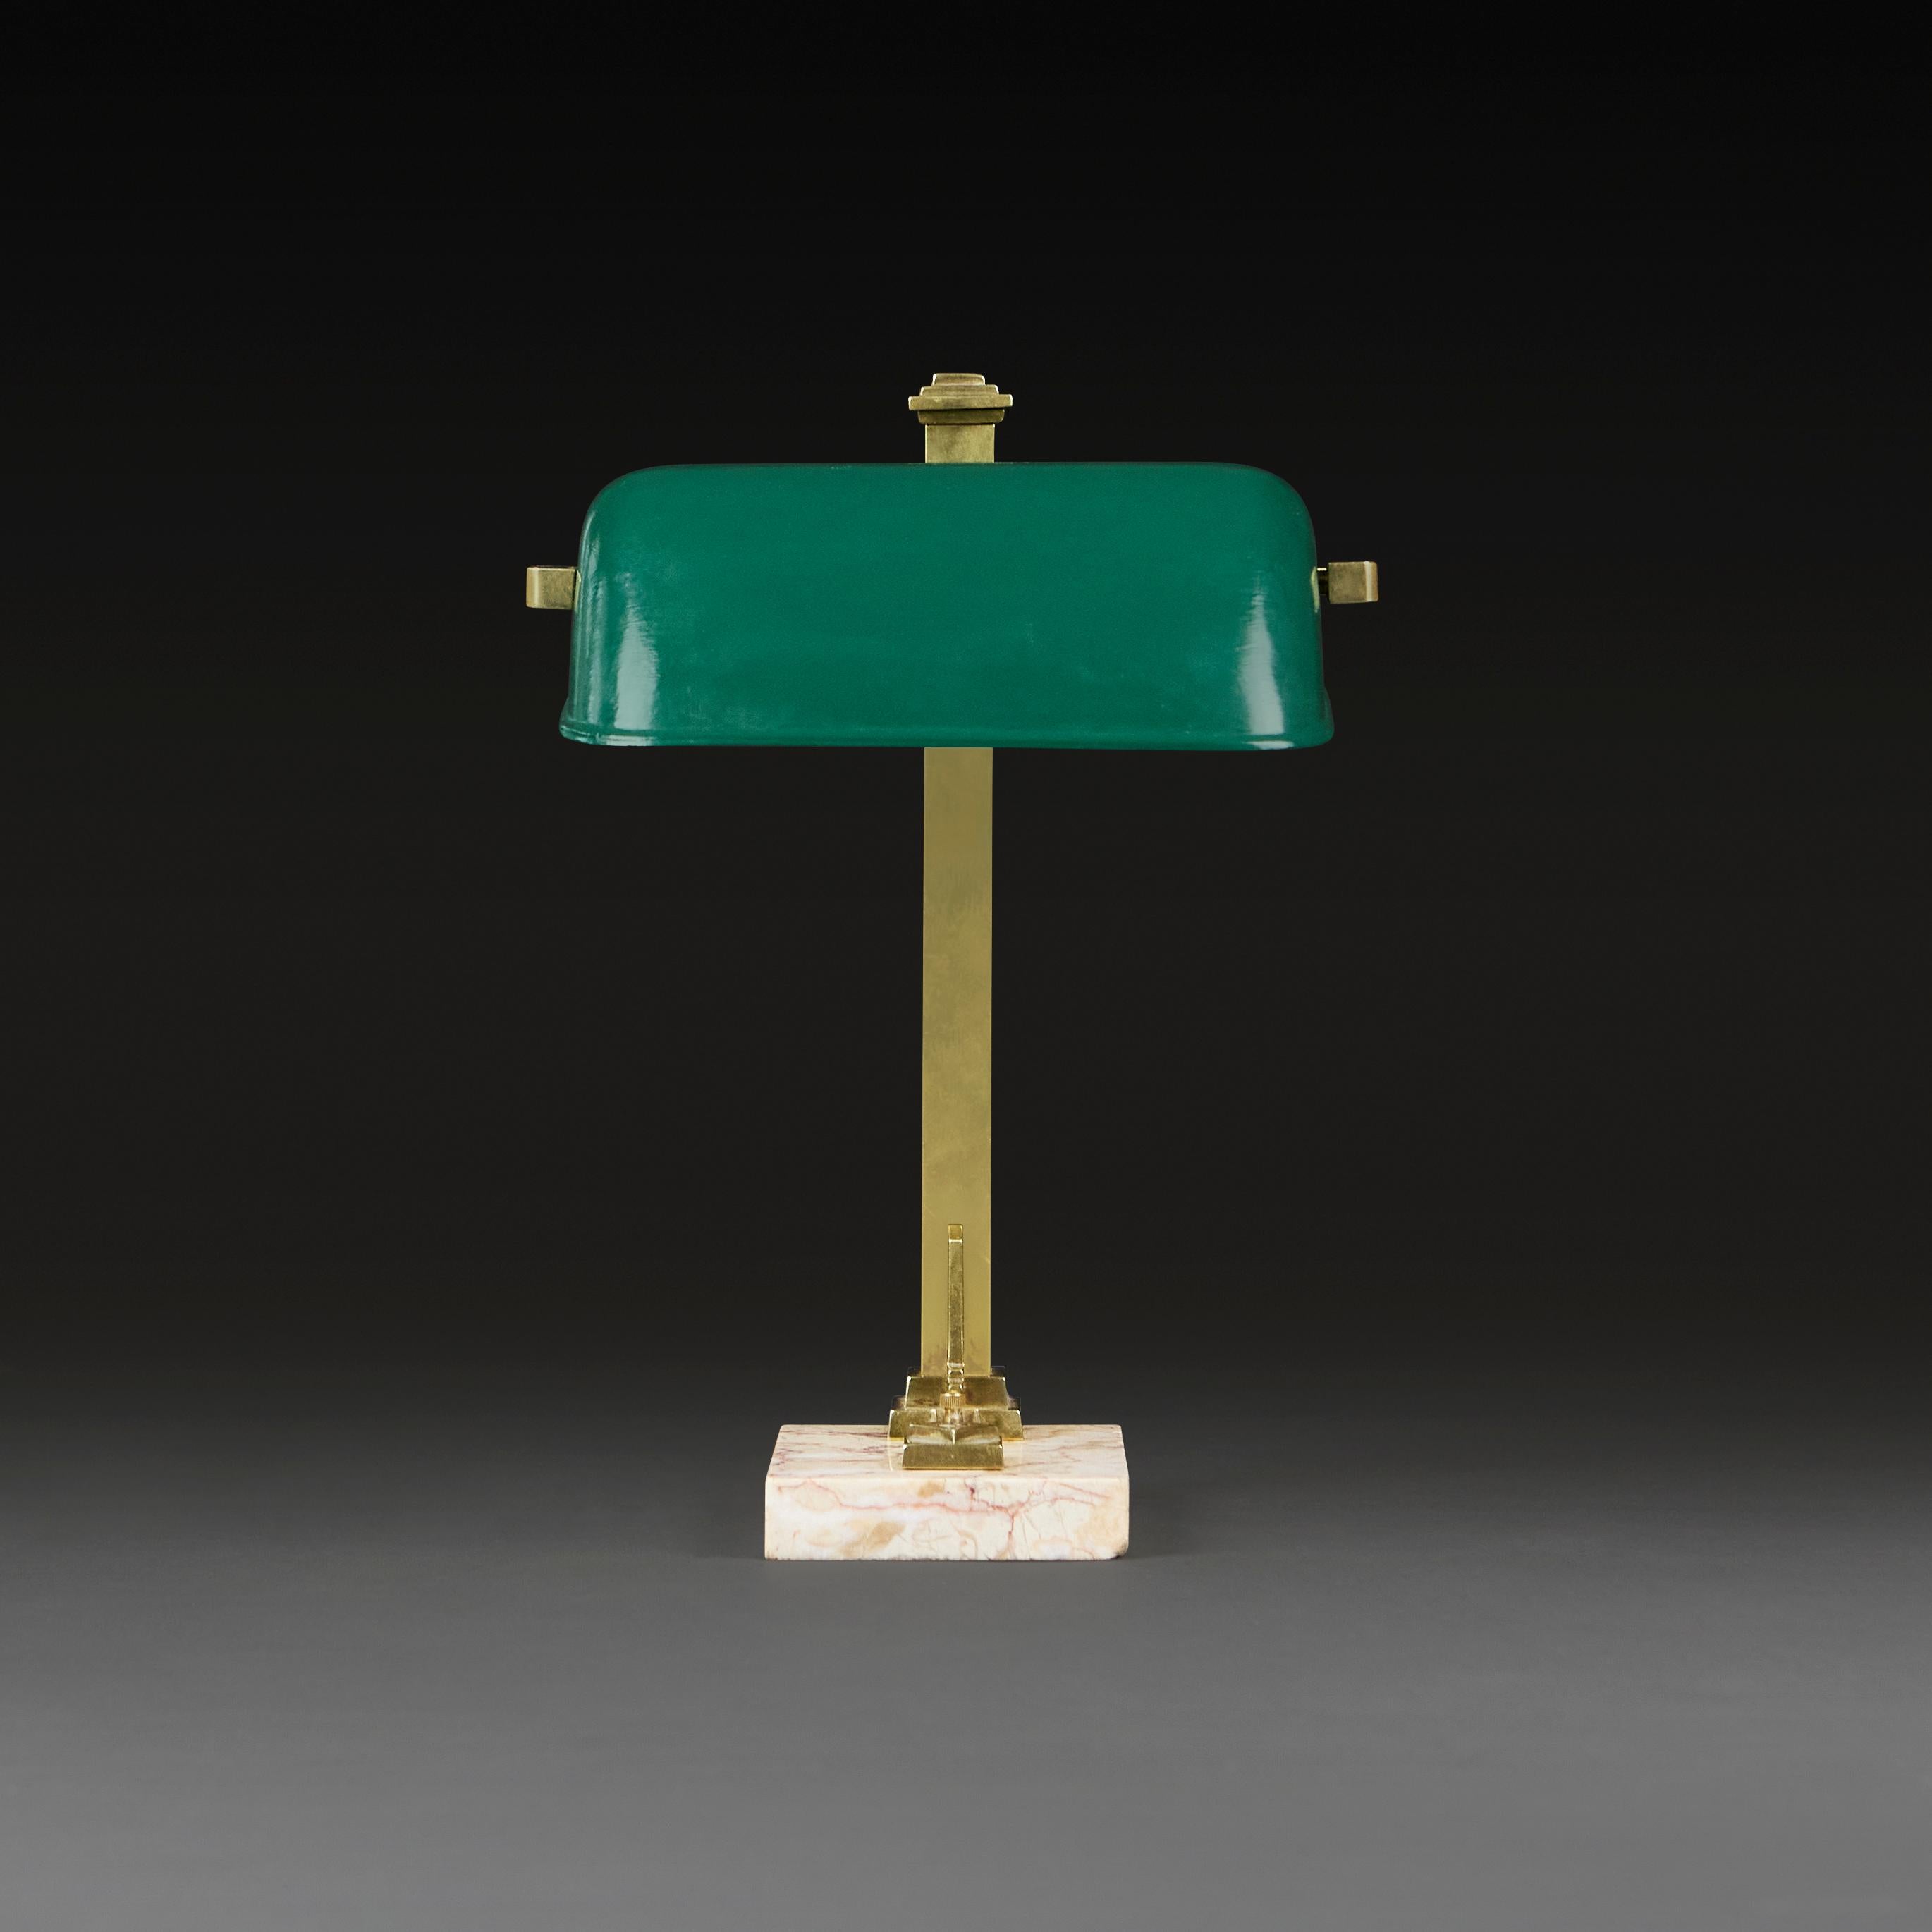 A 1930s French Art Deco Desk Lamp in Brass, Marble and Green Enamel For Sale 1